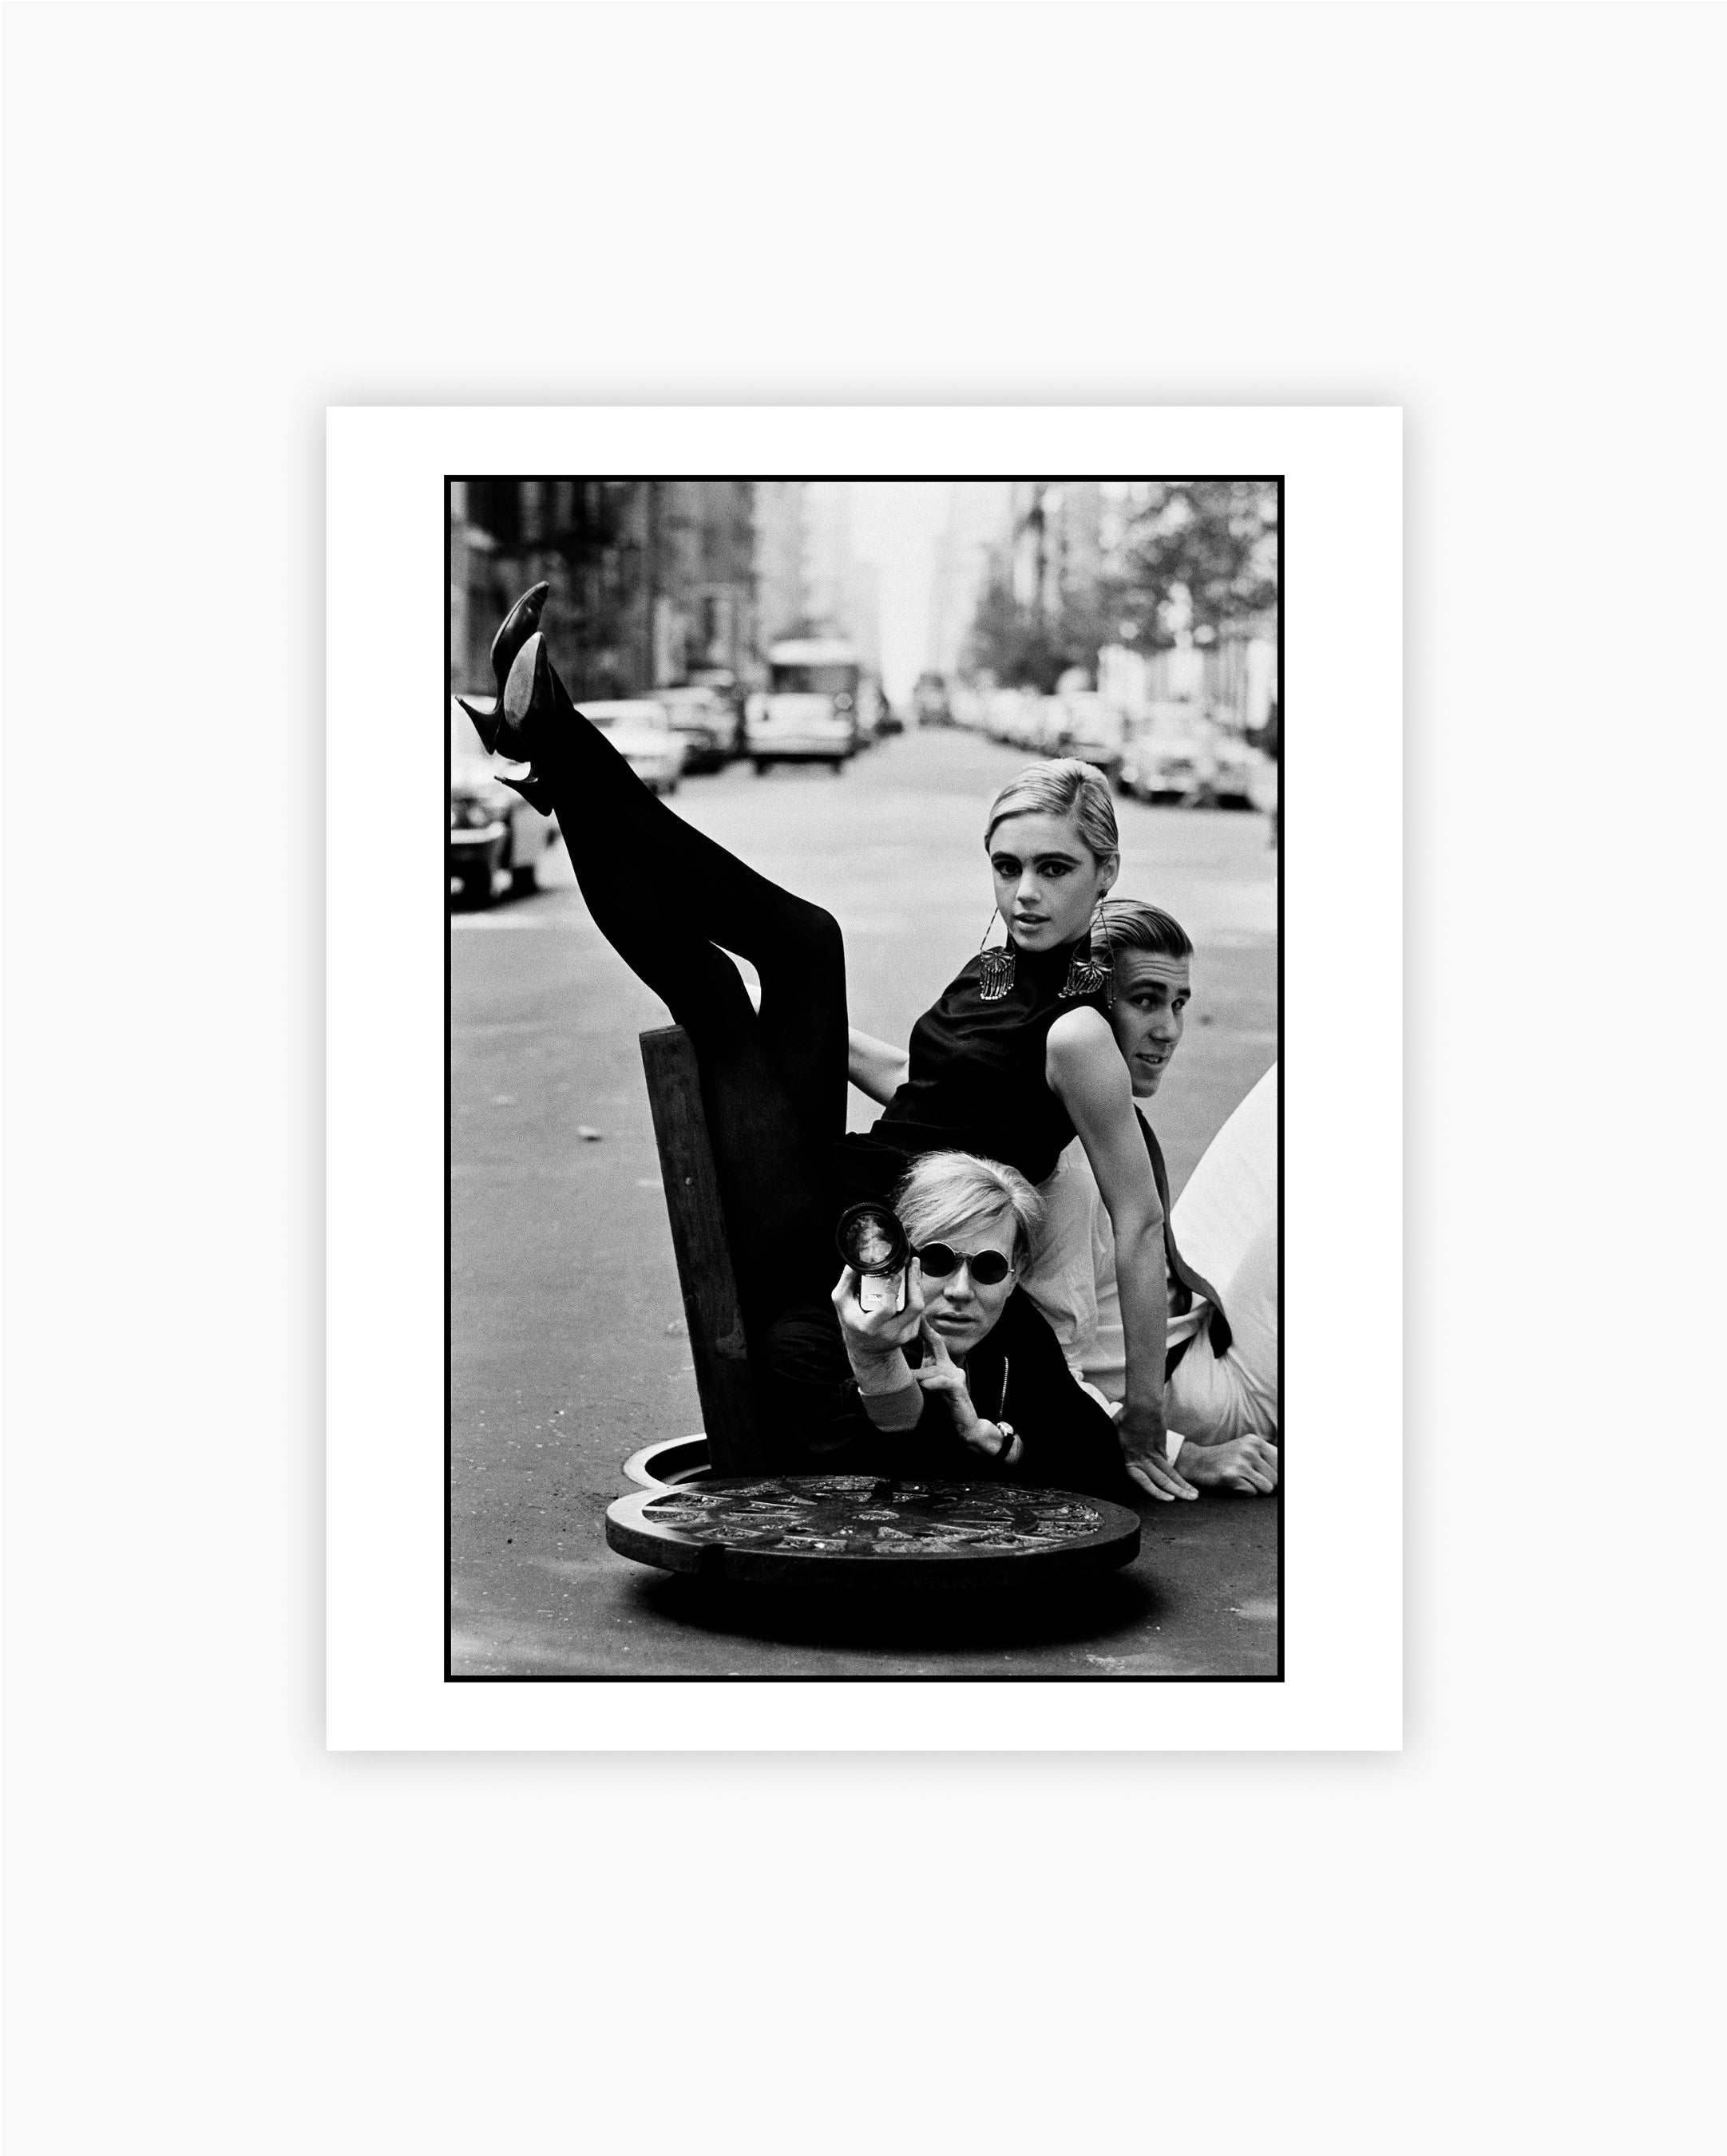 Magnum Editions: Andy Warhol, Edie Sedgwick and Chuck Wein in New York, 1965